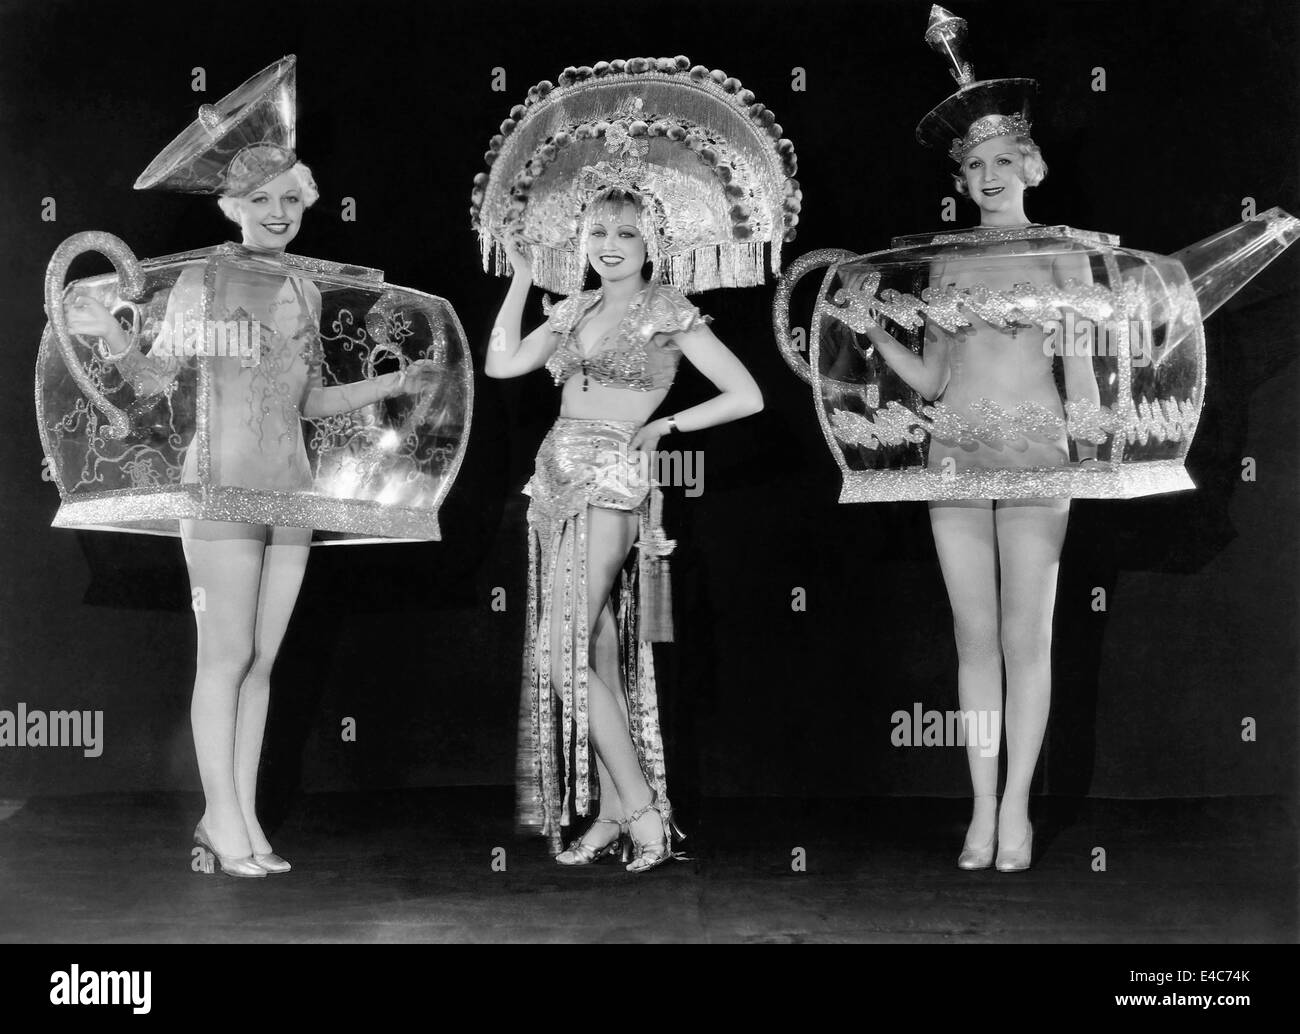 Lona Andre (Center) and Showgirls in Teacup Costumes, Publicity Portrait for the Film, 'International House', 1933 Stock Photo